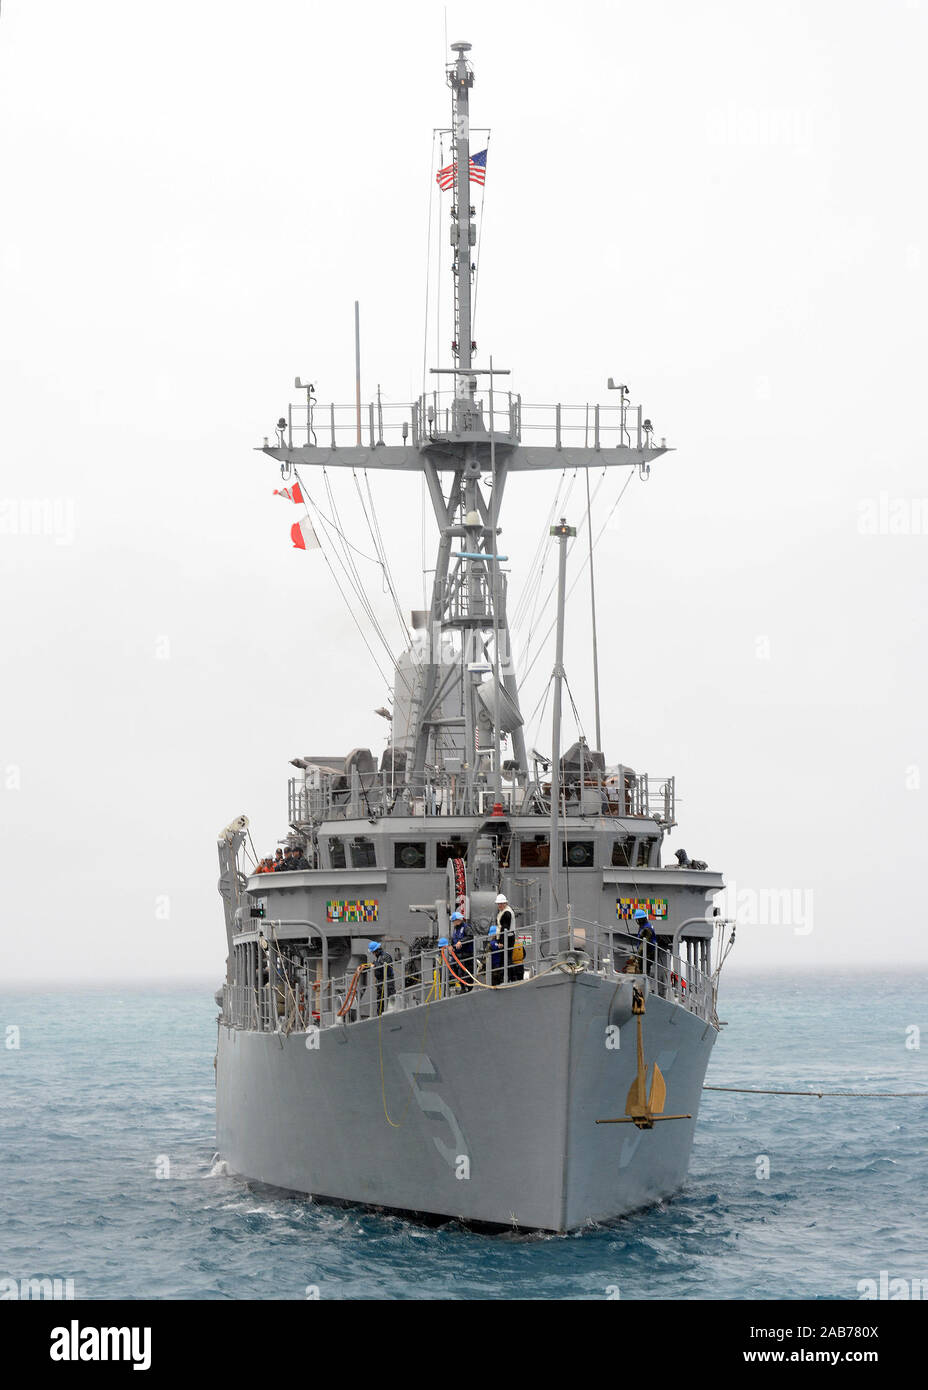 OKINAWA, Japan (Jan. 8, 2013) The mine countermeasures ship USS Guardian (MCM 5) arrives at White Beach Naval Facility for a port visit and supply replenishment during its 2013 patrol in the U.S. 7th Fleet area of responsibility. Stock Photo